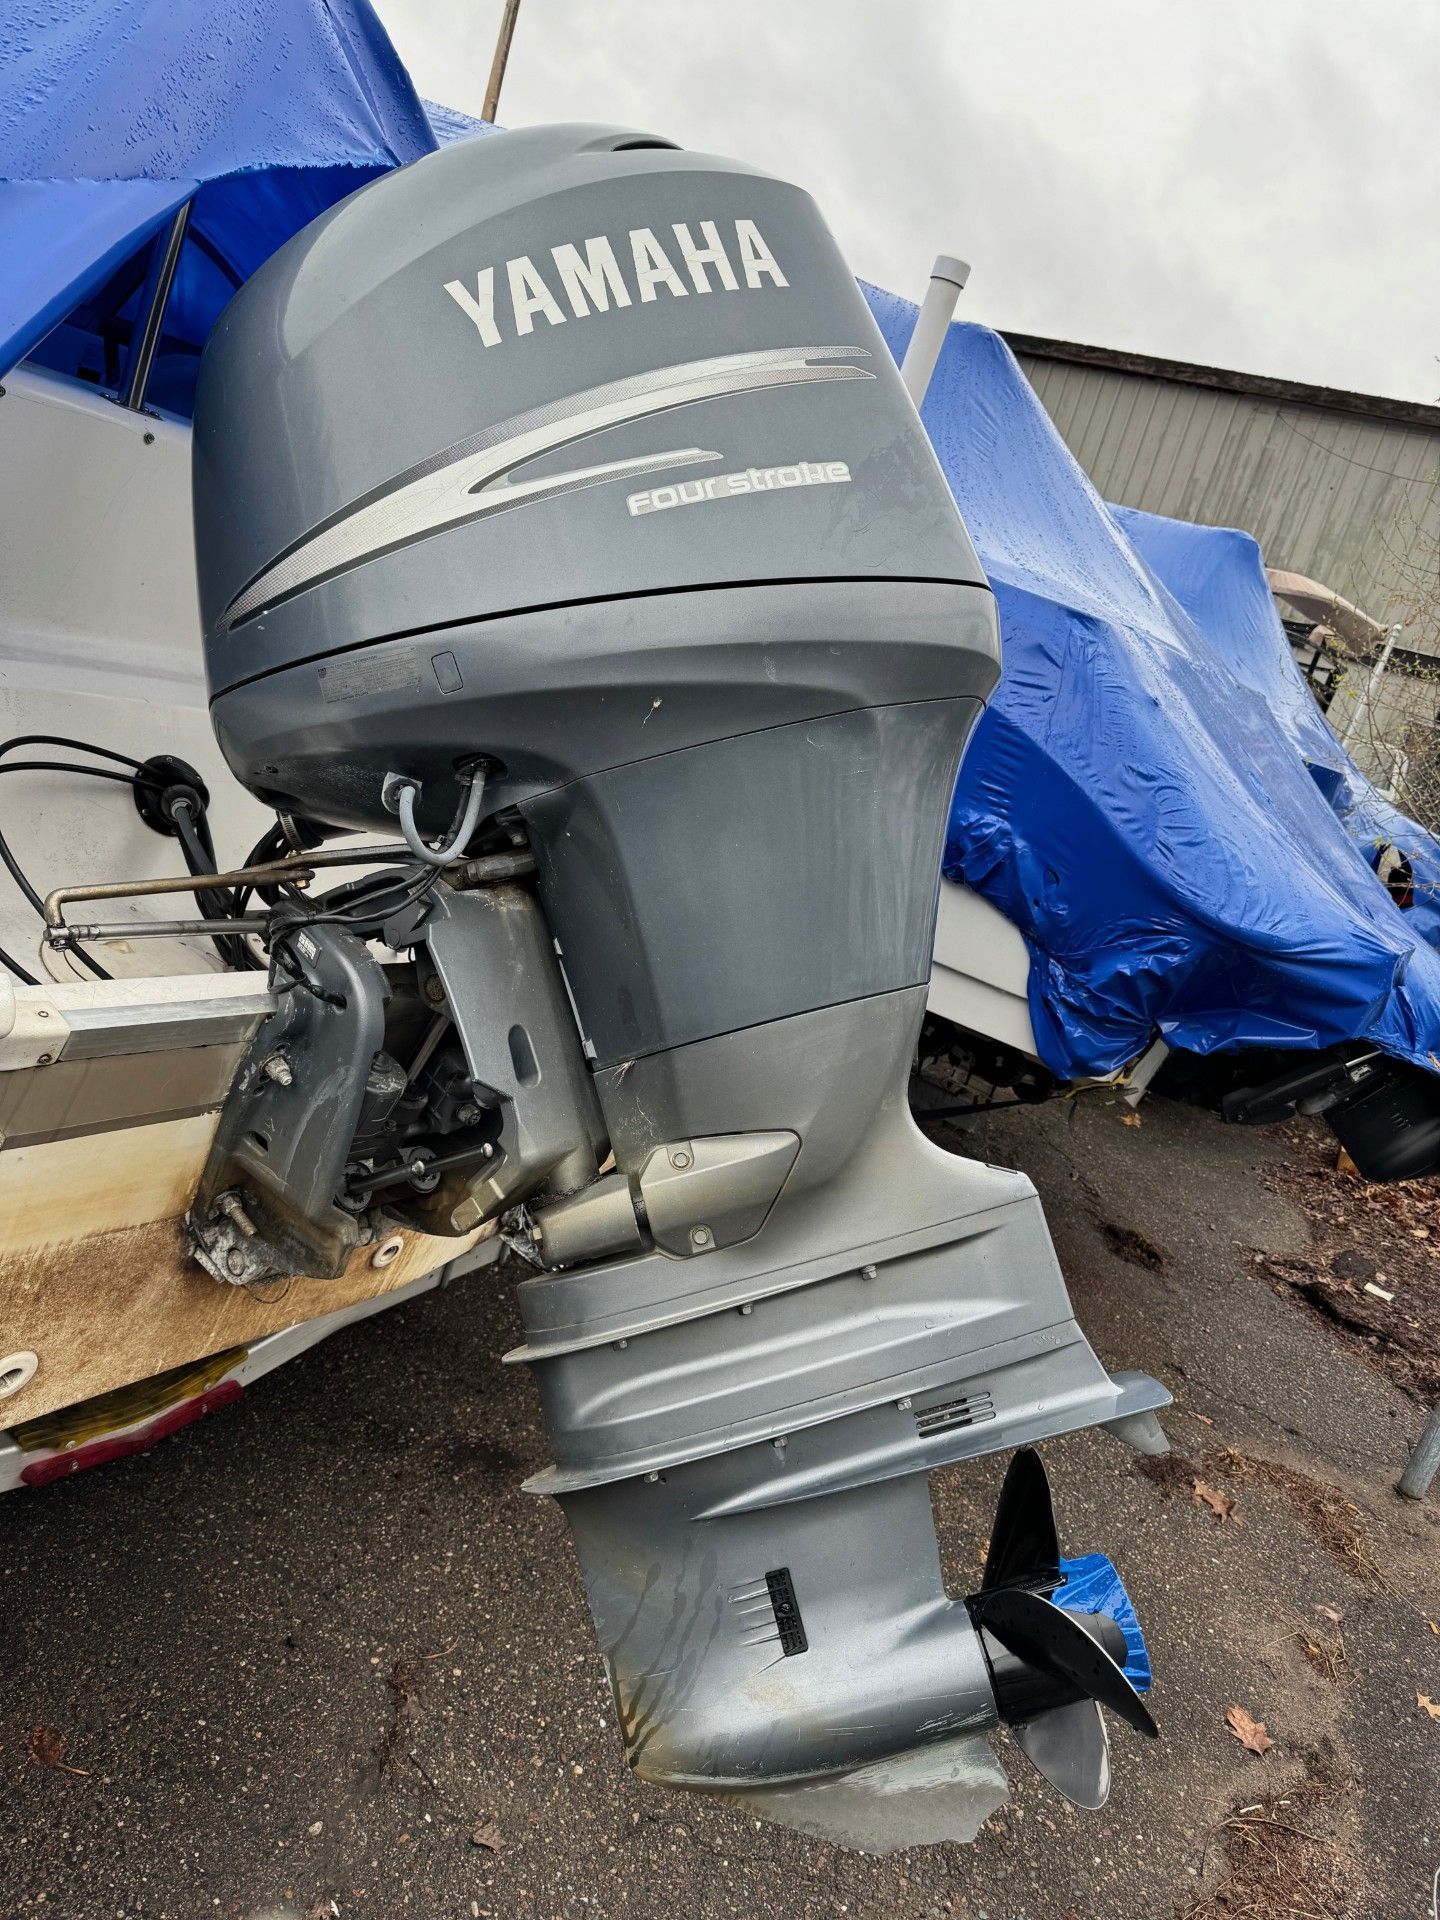 A yamaha outboard motor is sitting on the ground next to a boat.